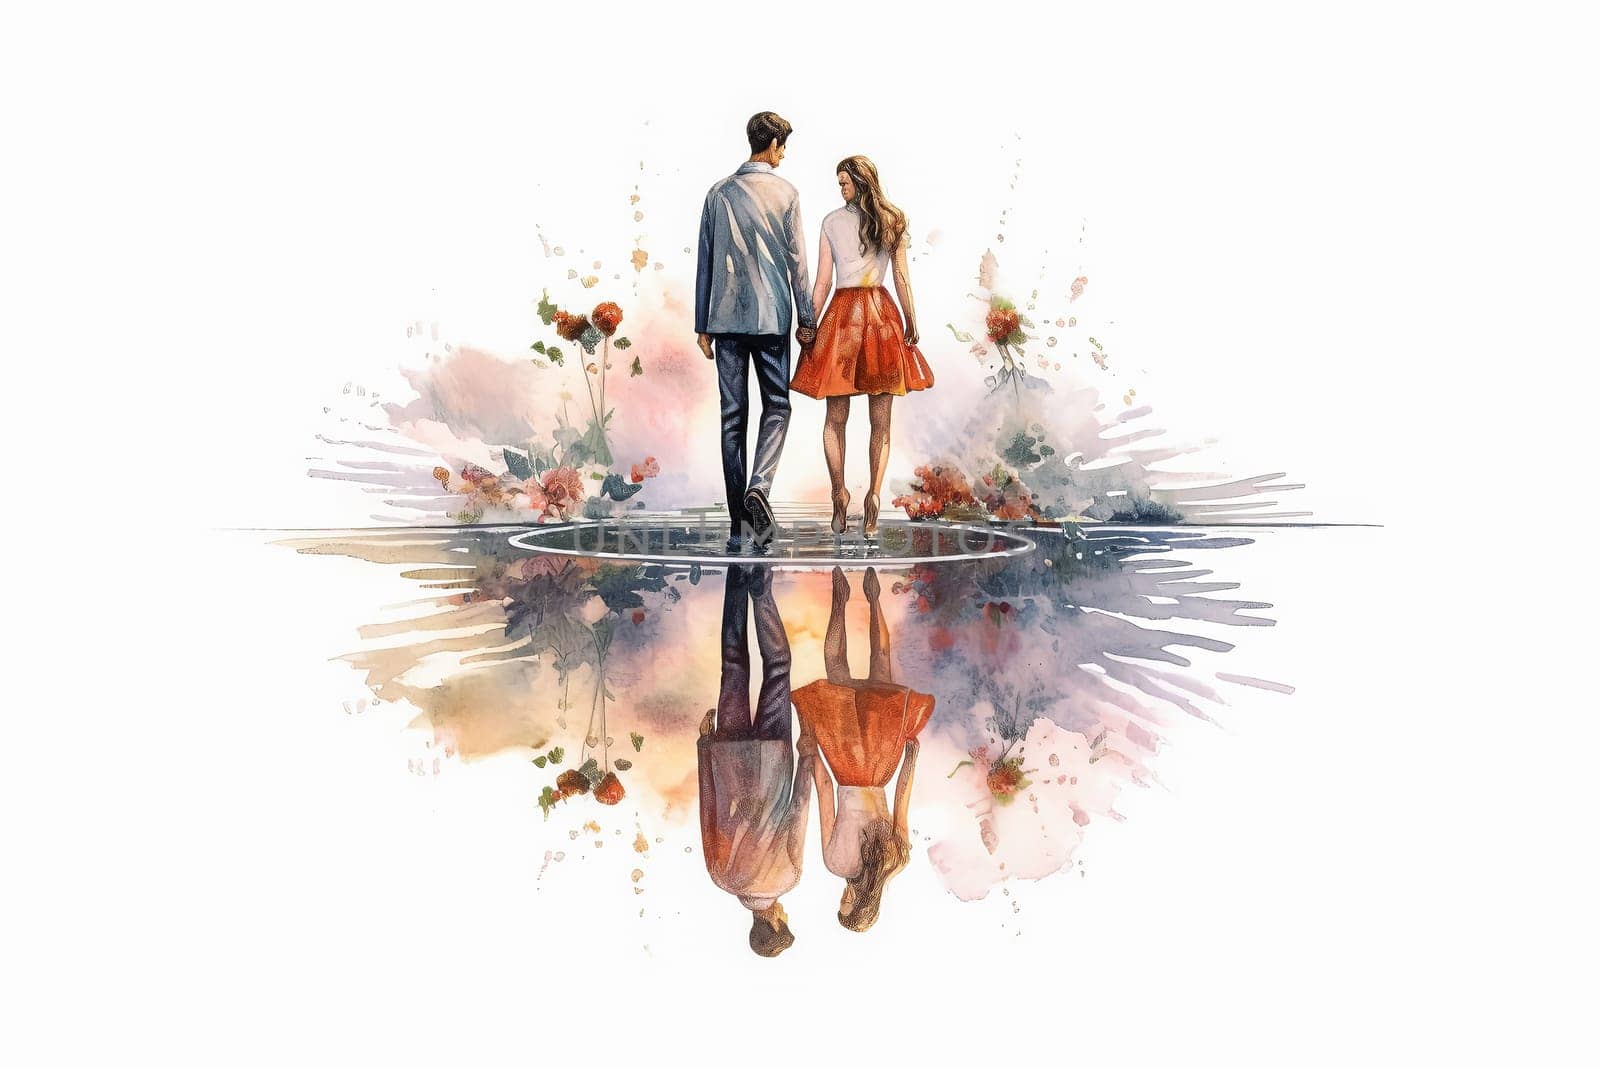 Experience the magic of love as a watercolor illustration depicts a couple strolling outdoors after the rain. A romantic date captured in a picturesque setting.